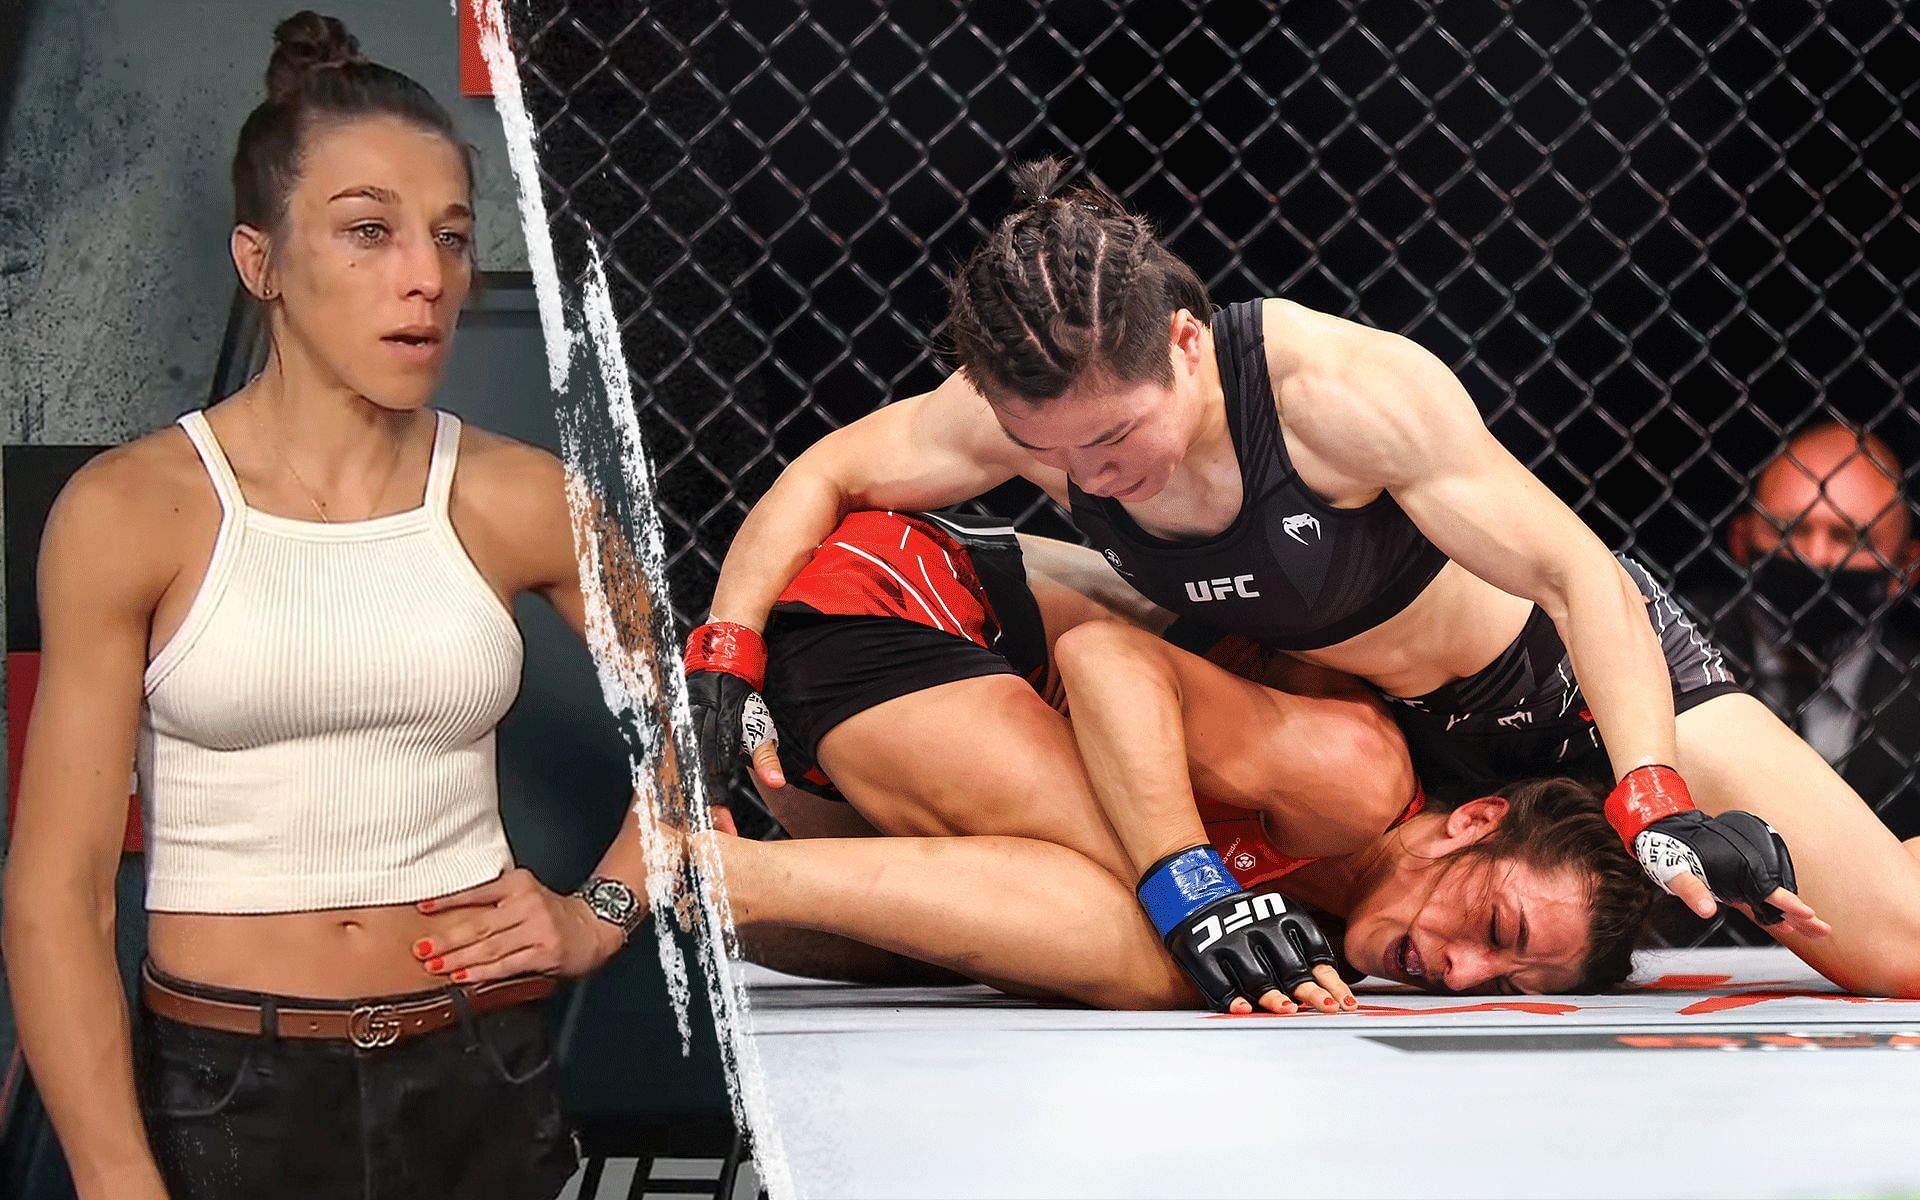 After her fight at UFC 275, Joanna Jedrzejczyk took off her gloves and anno...